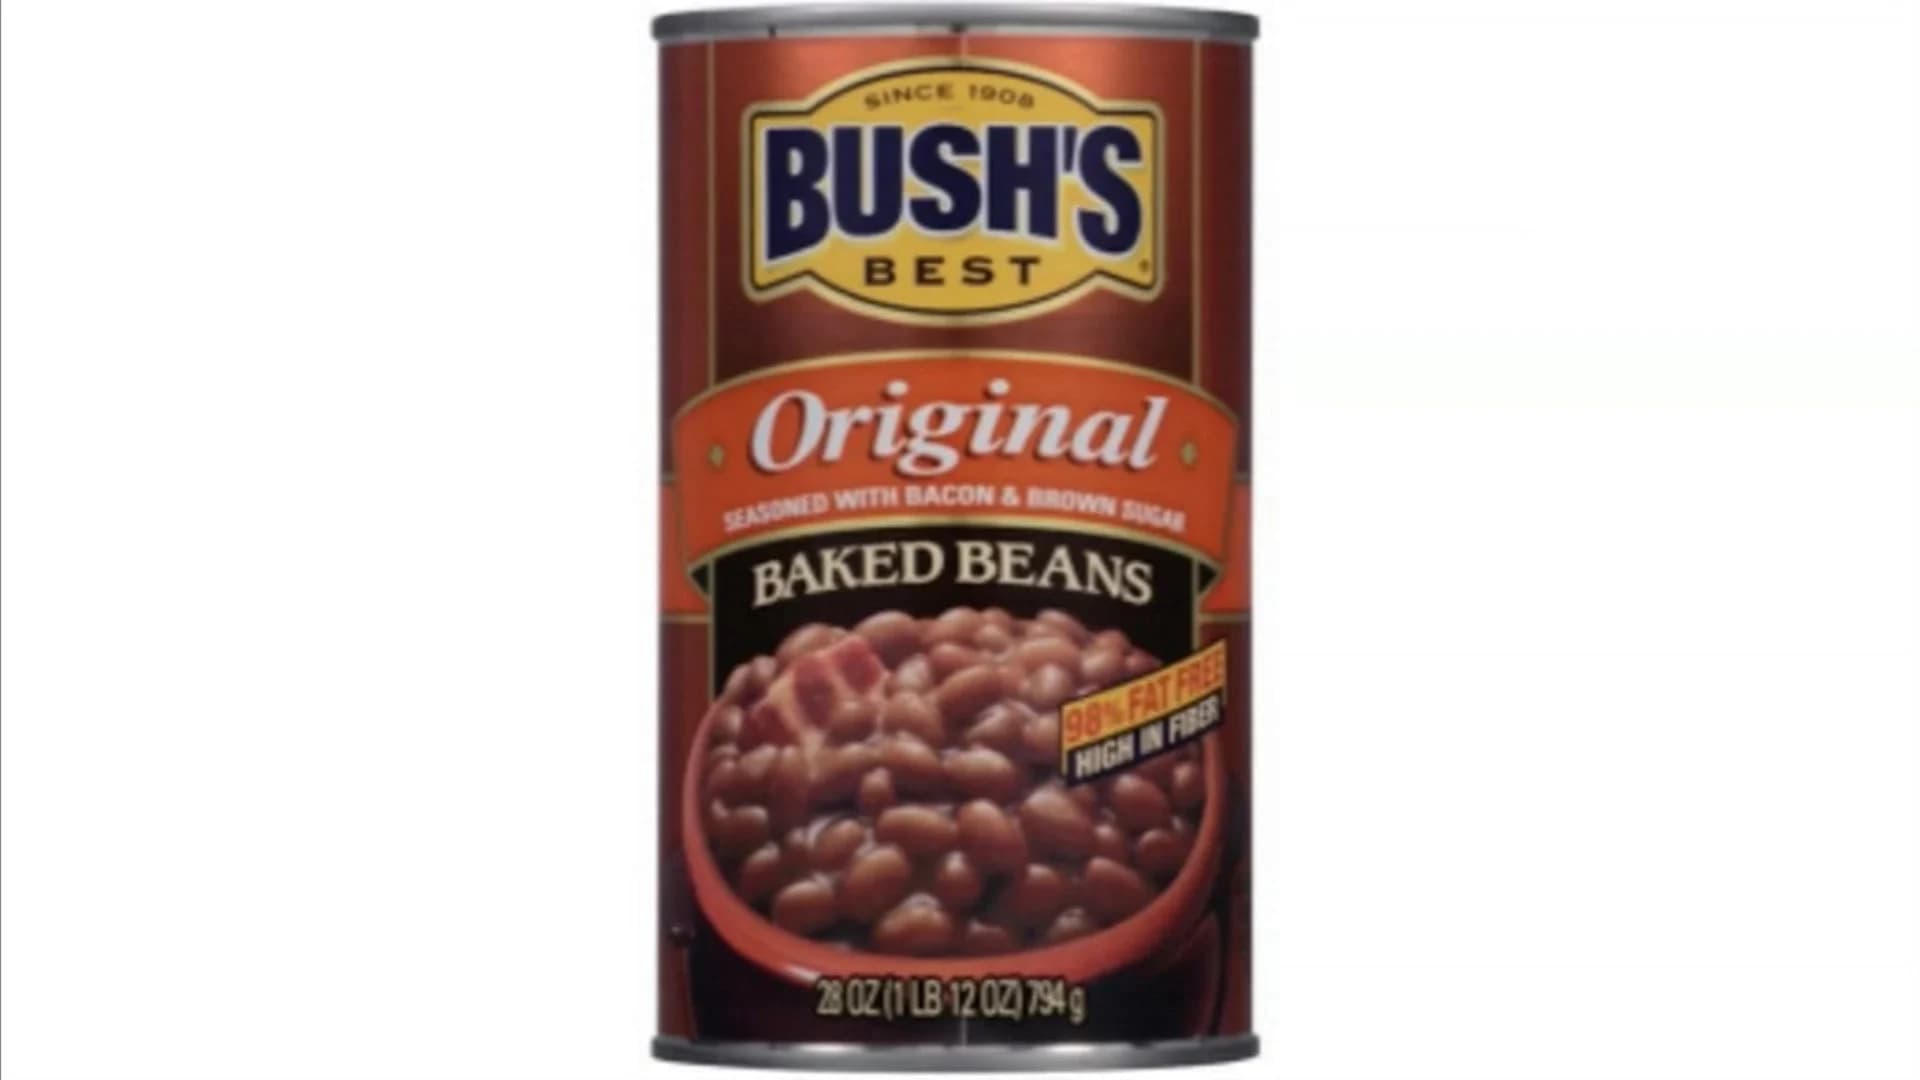 Bush’s Baked Beans issues recall